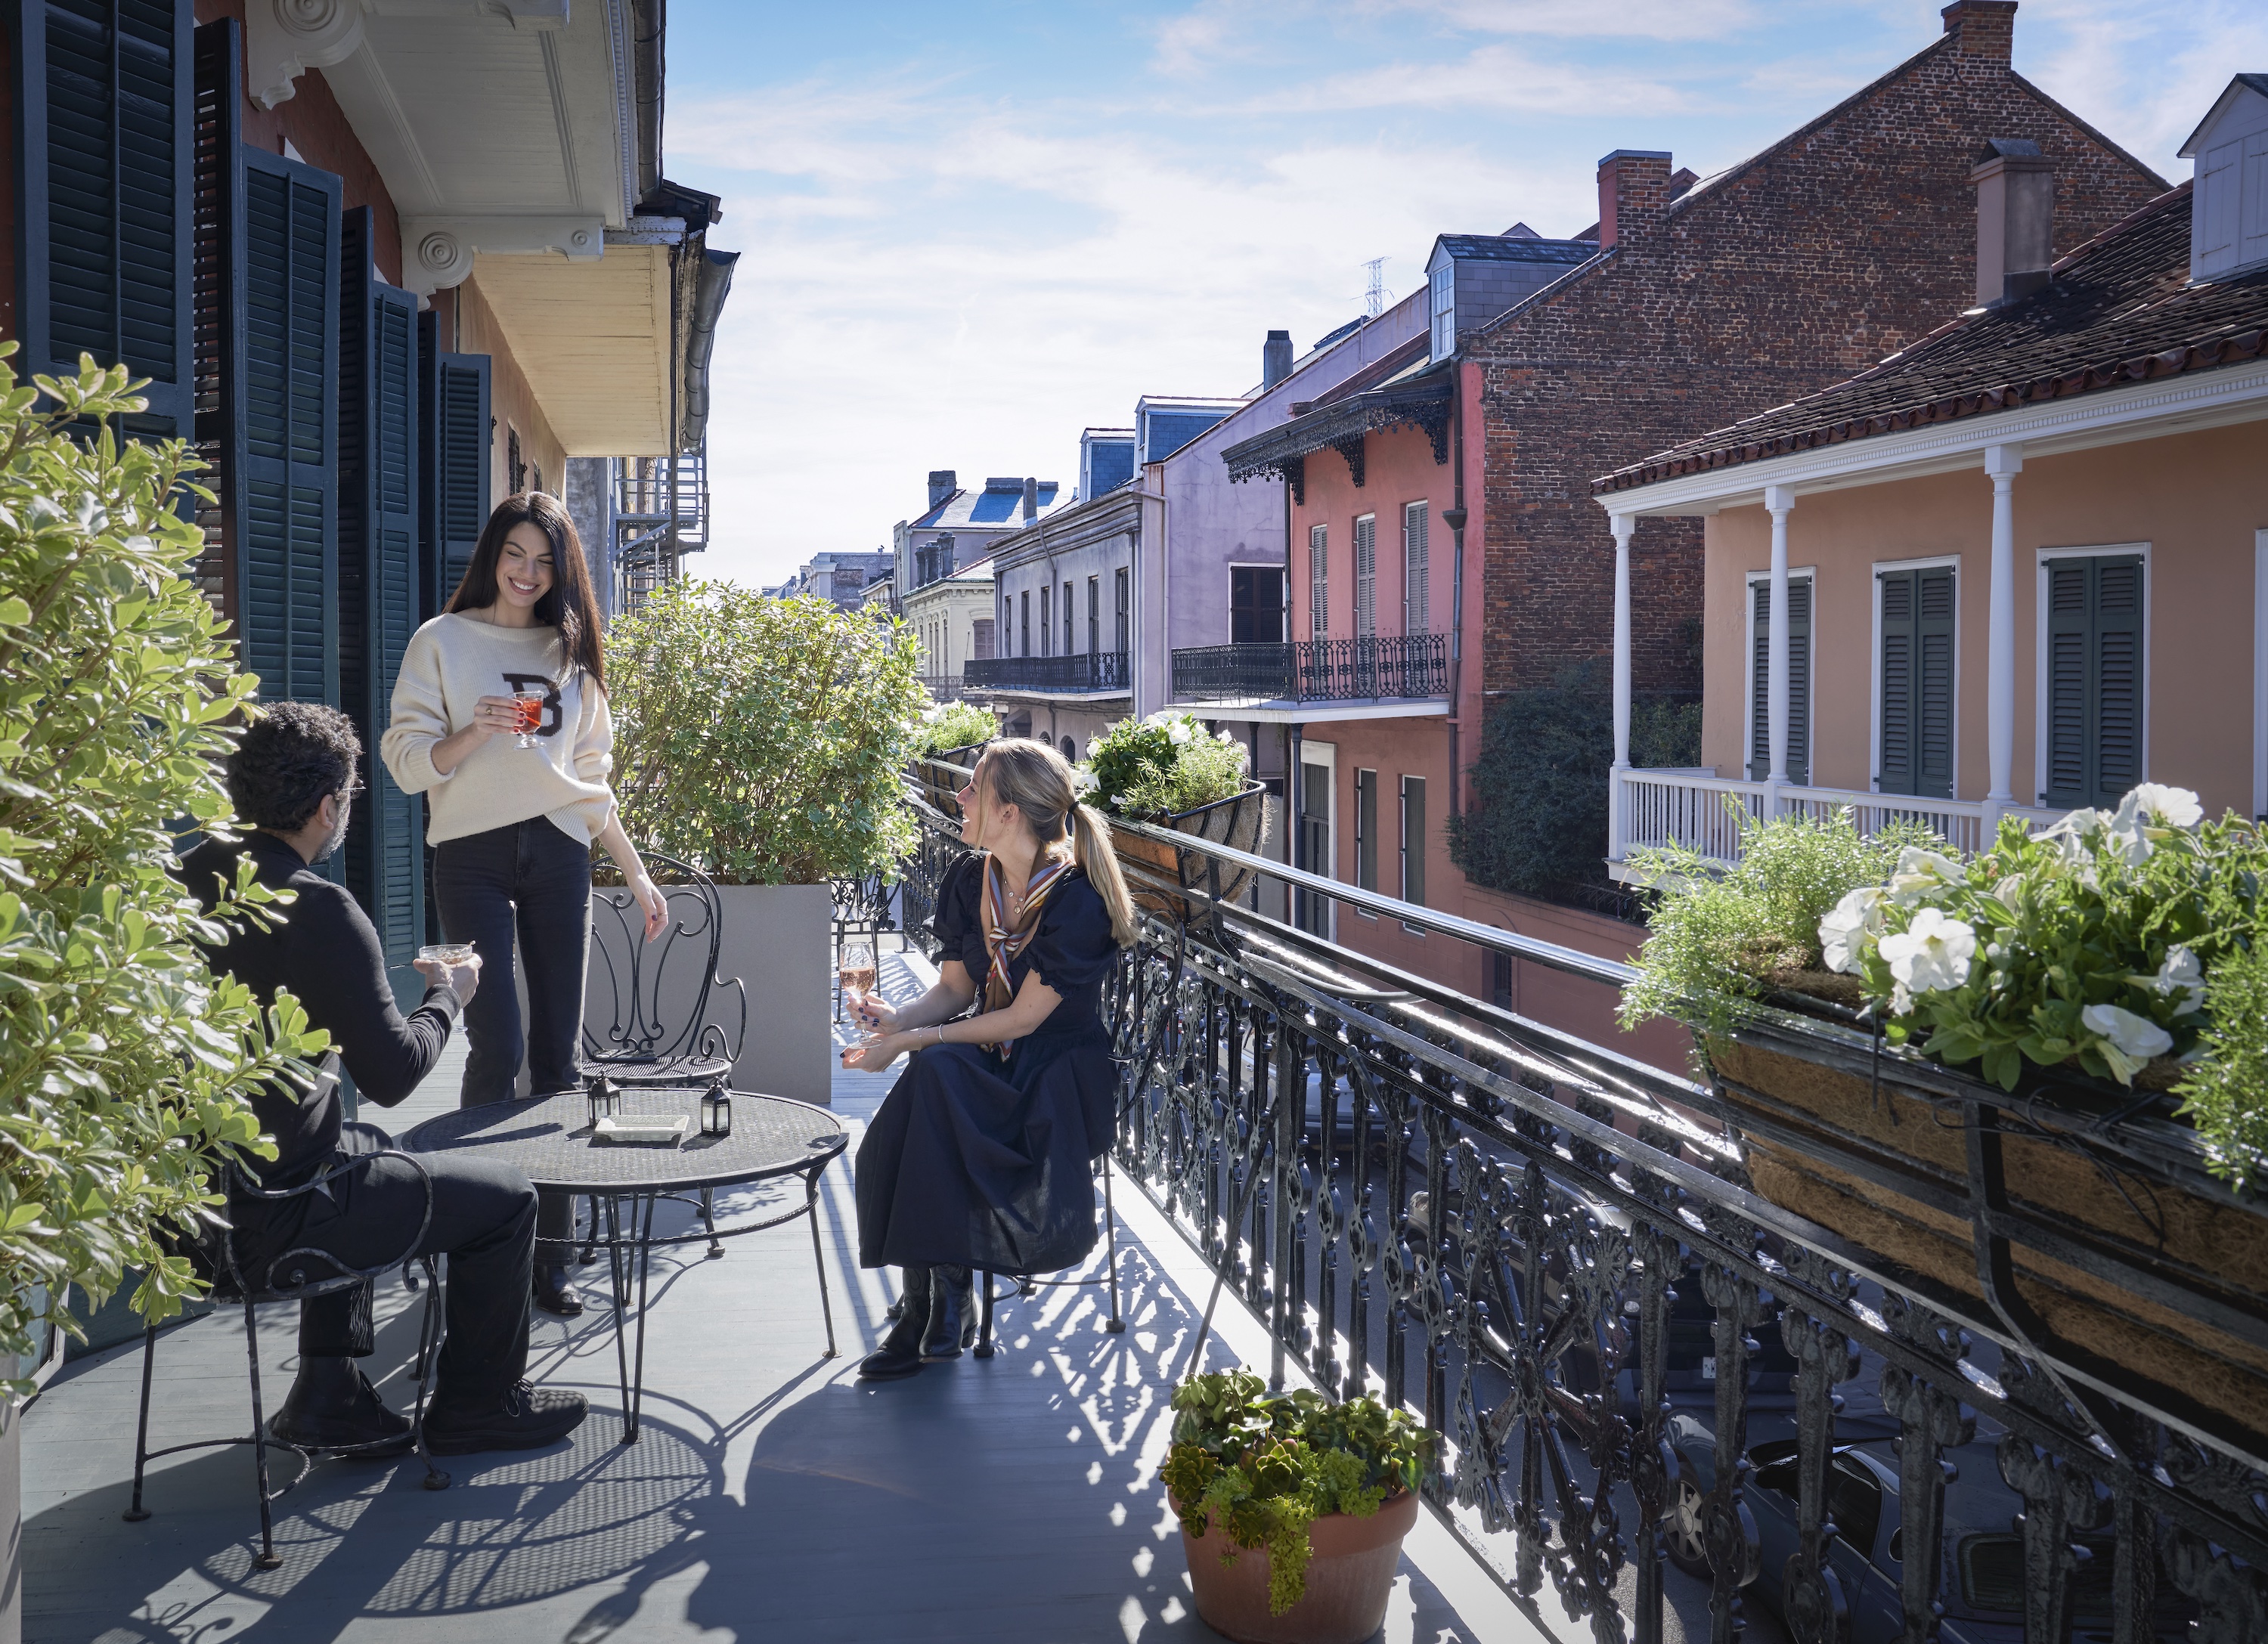 A balcony with three people enjoying a drink